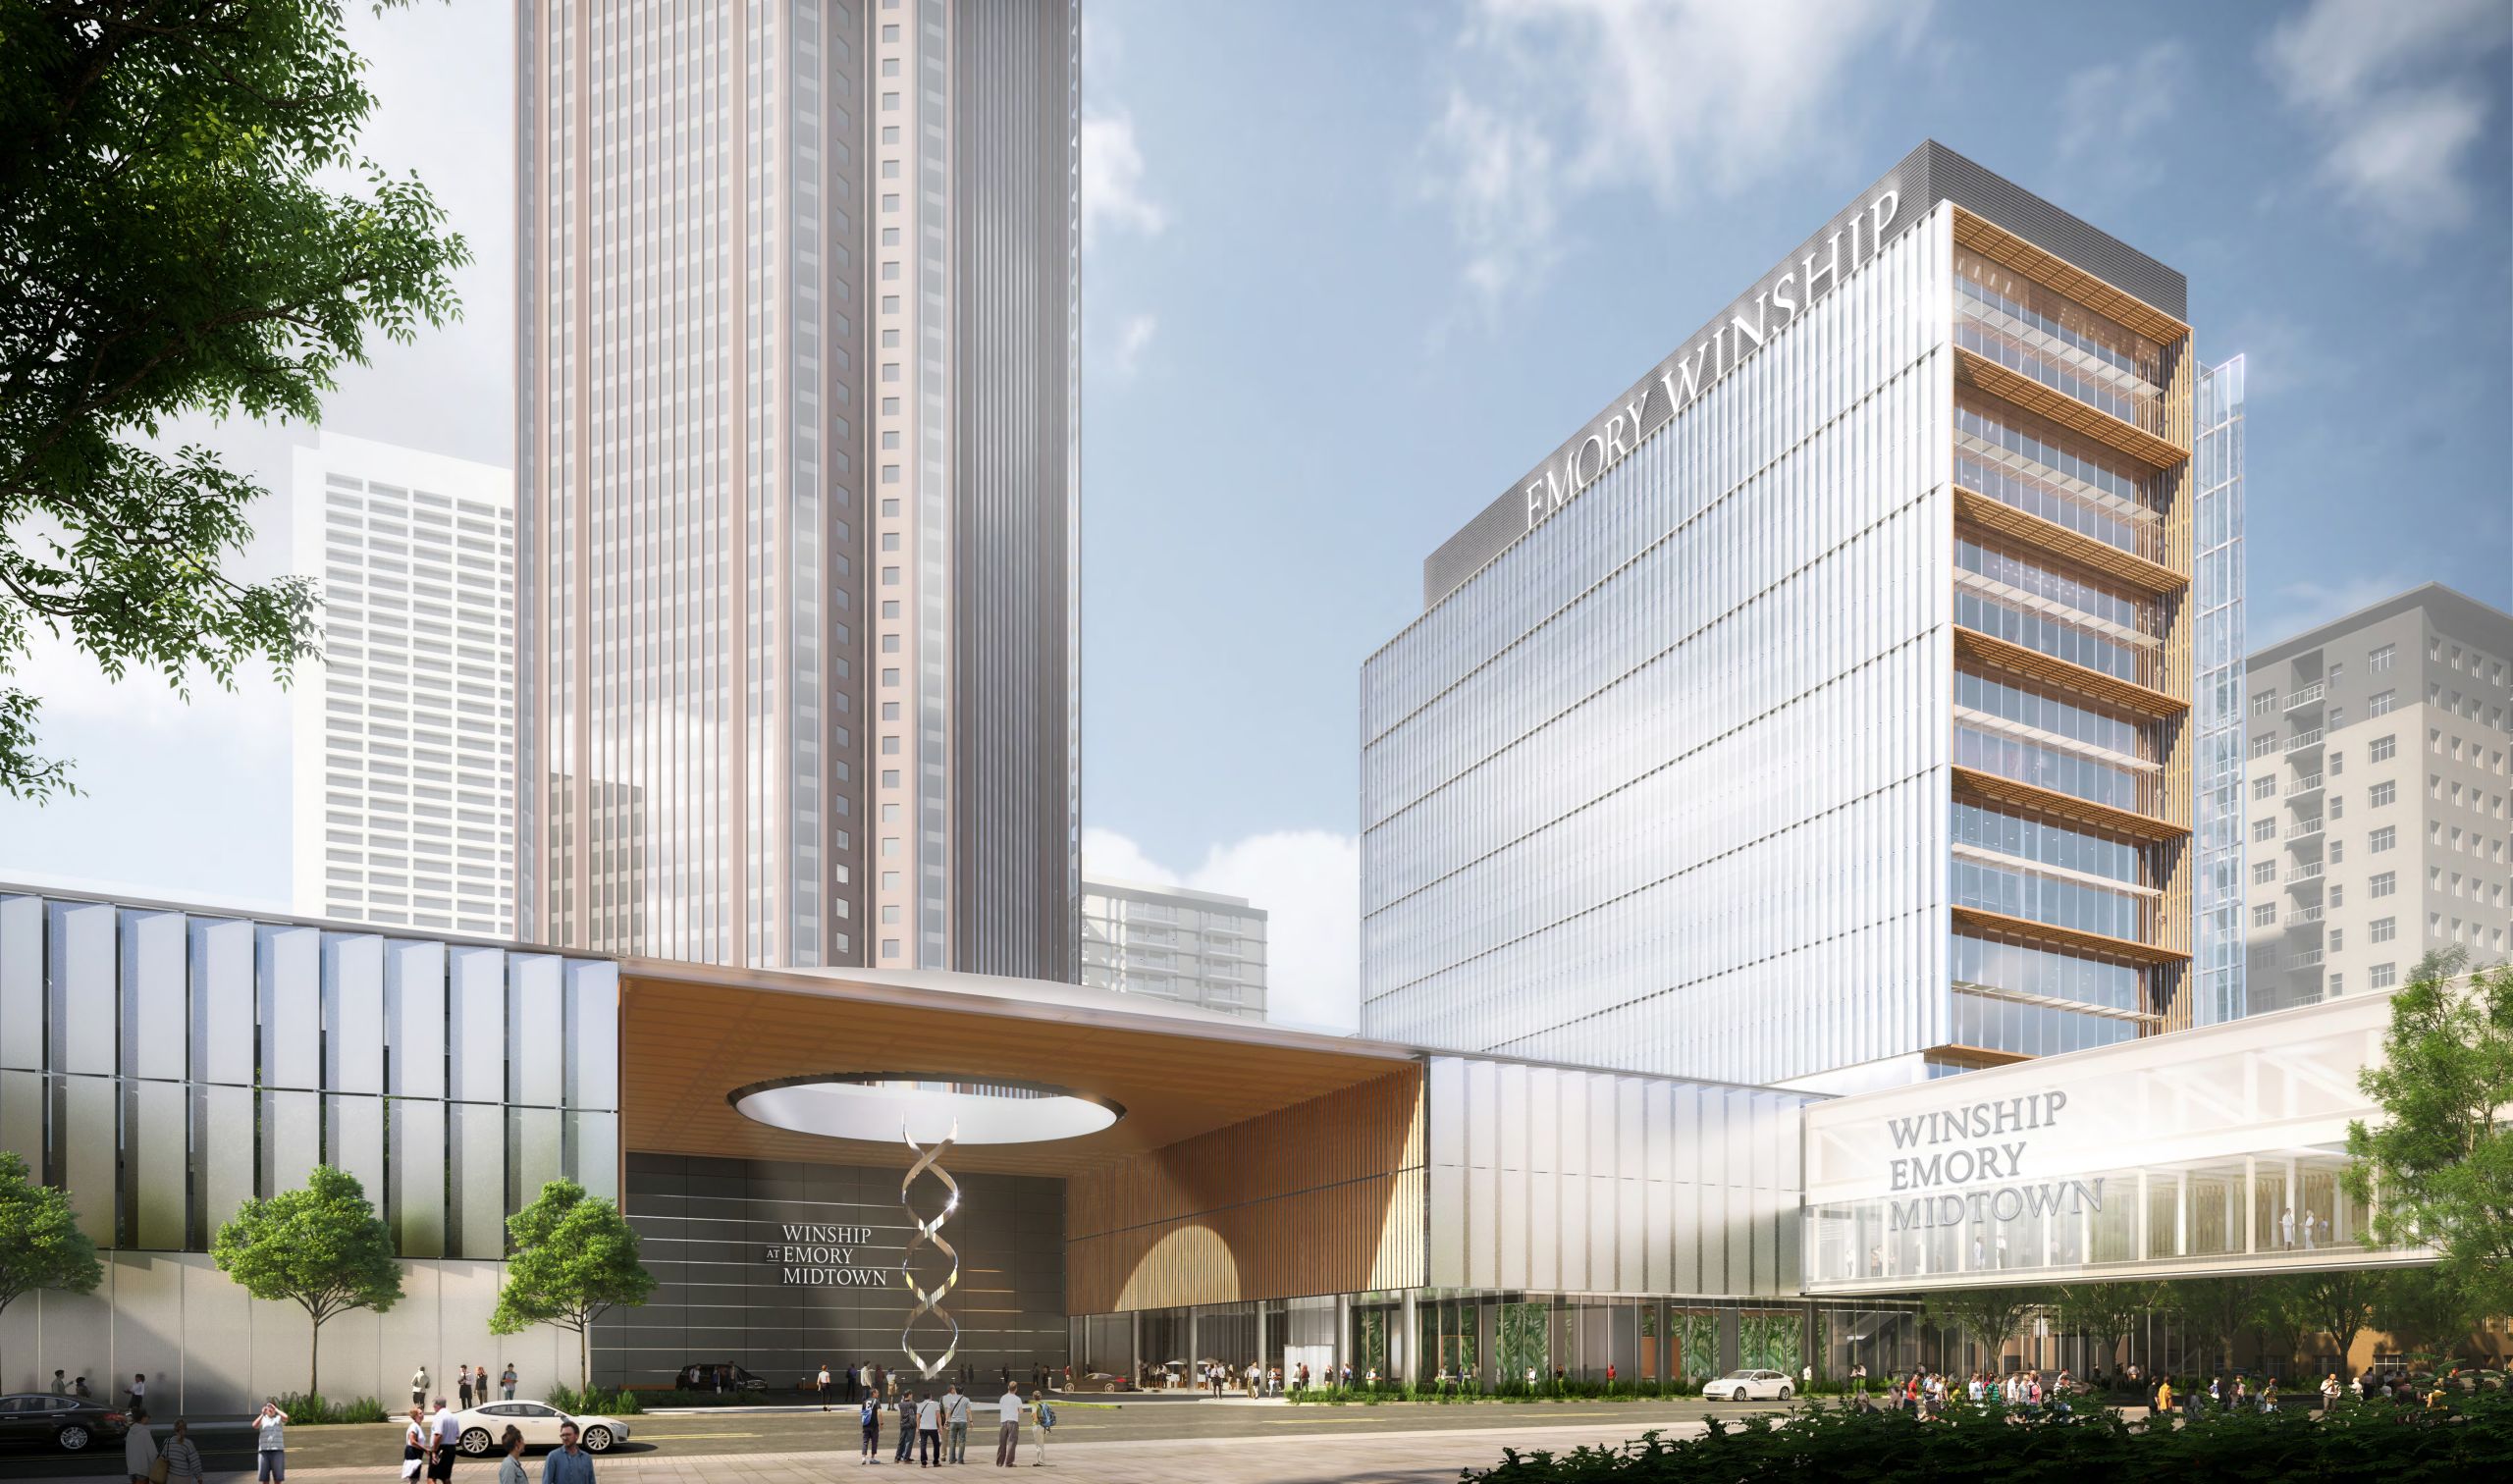 Rendering of the Winship at Emory Midtown building